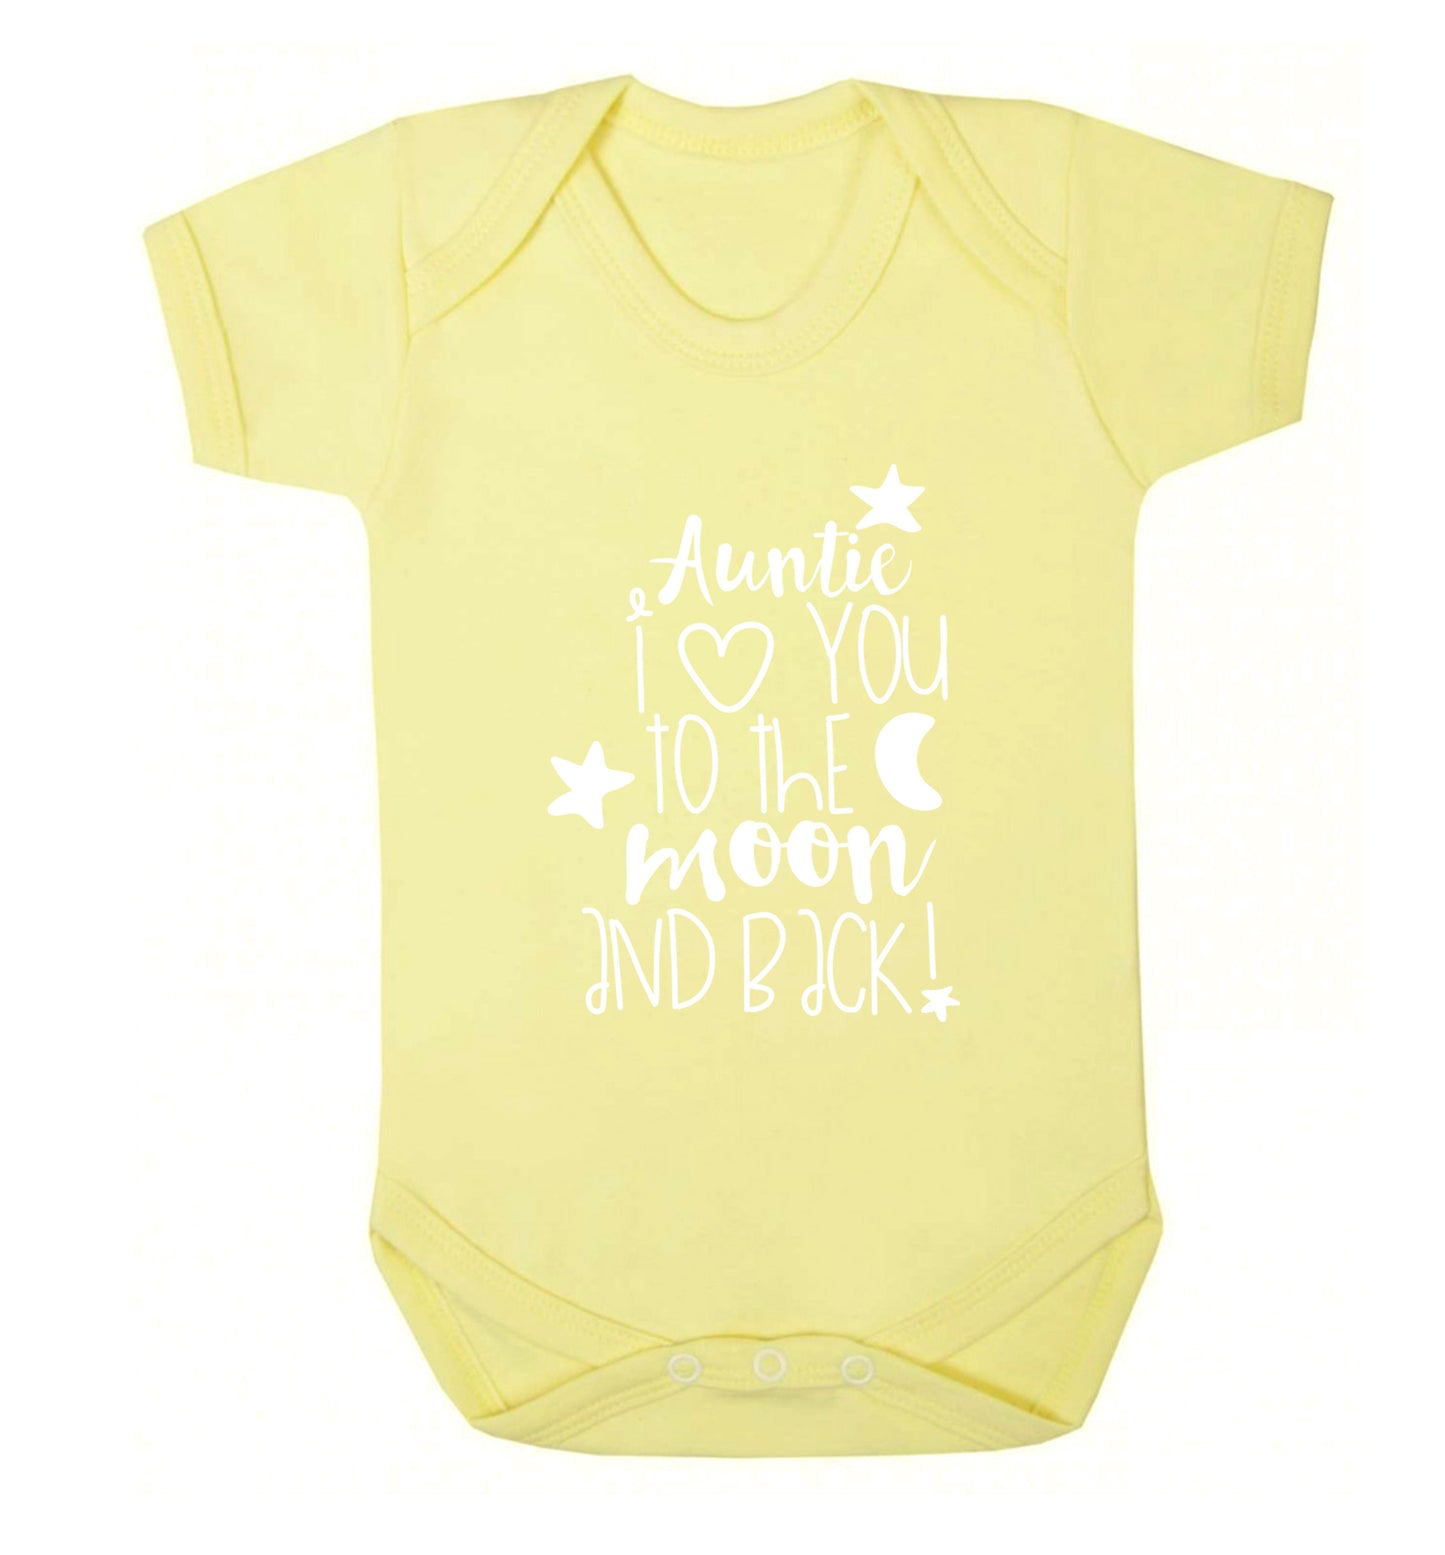 Auntie I love you to the moon and back Baby Vest pale yellow 18-24 months